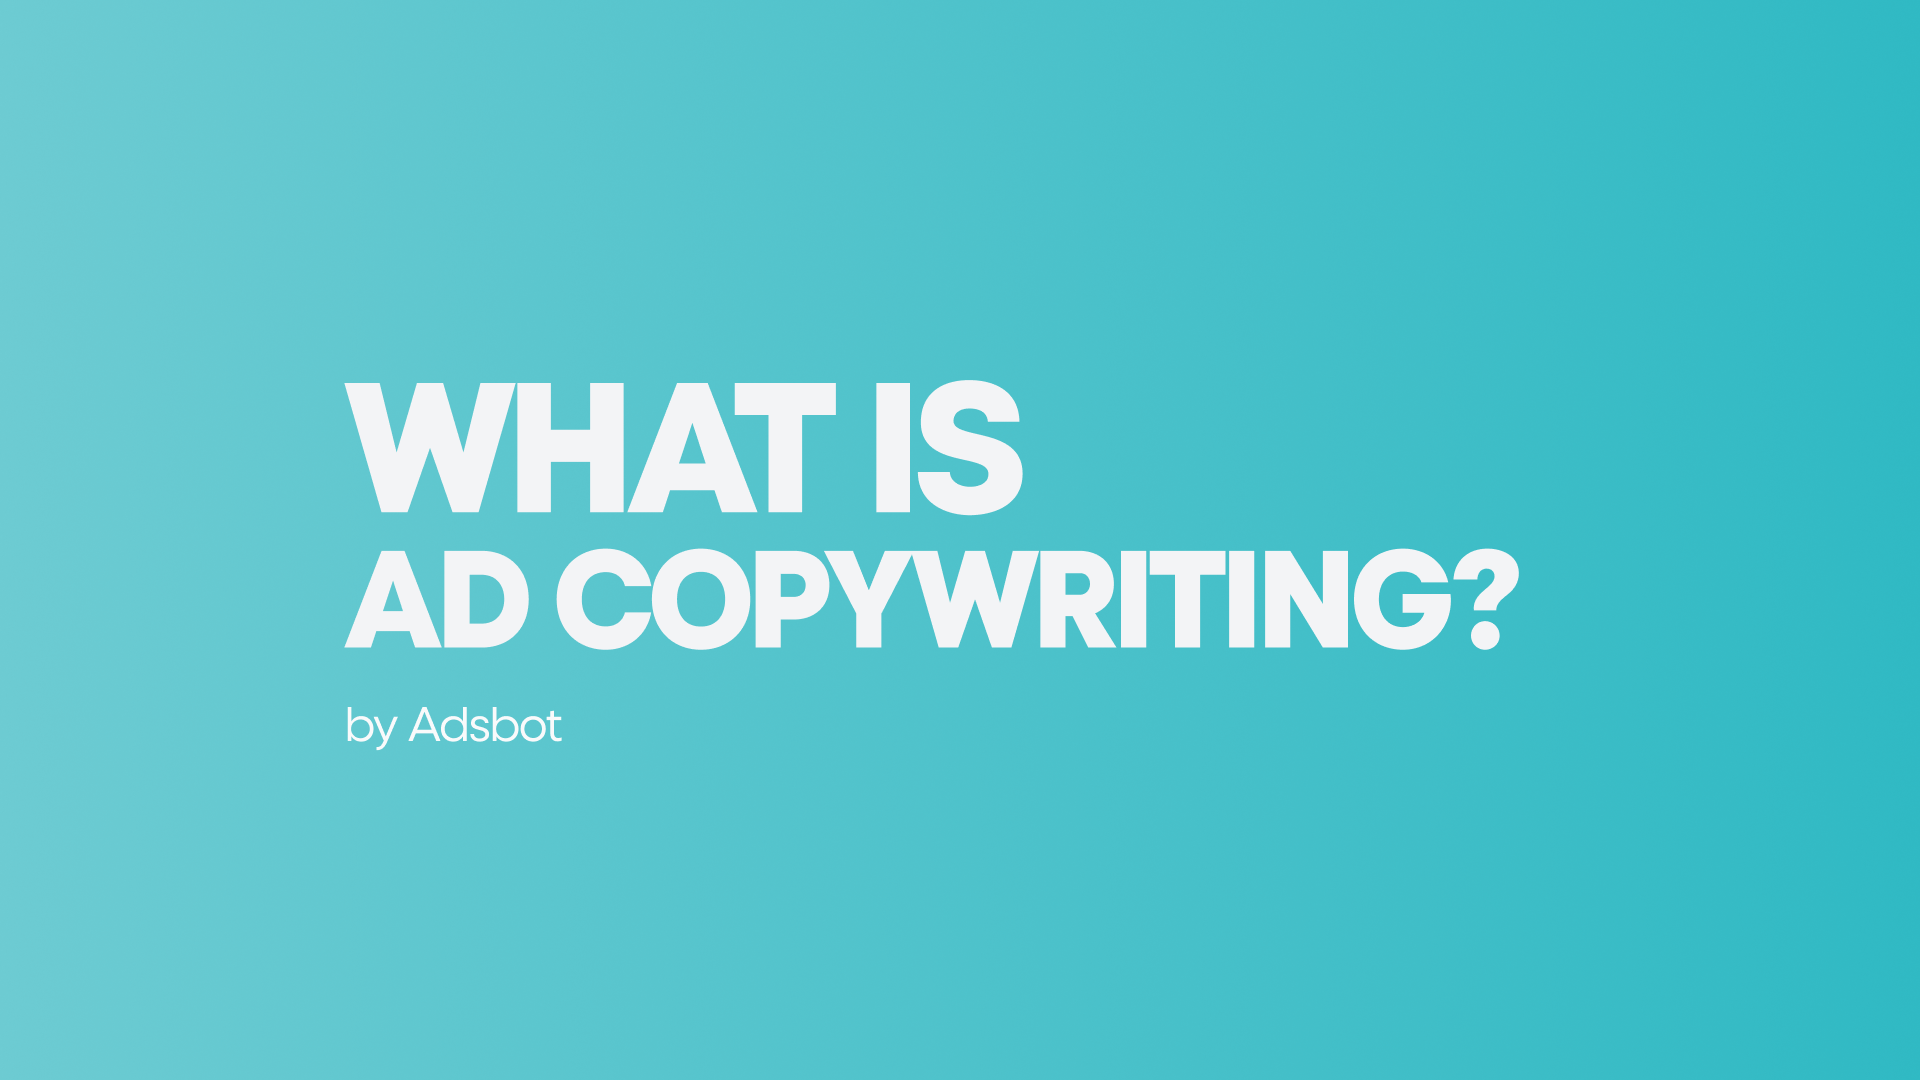 what is ad copwriting?